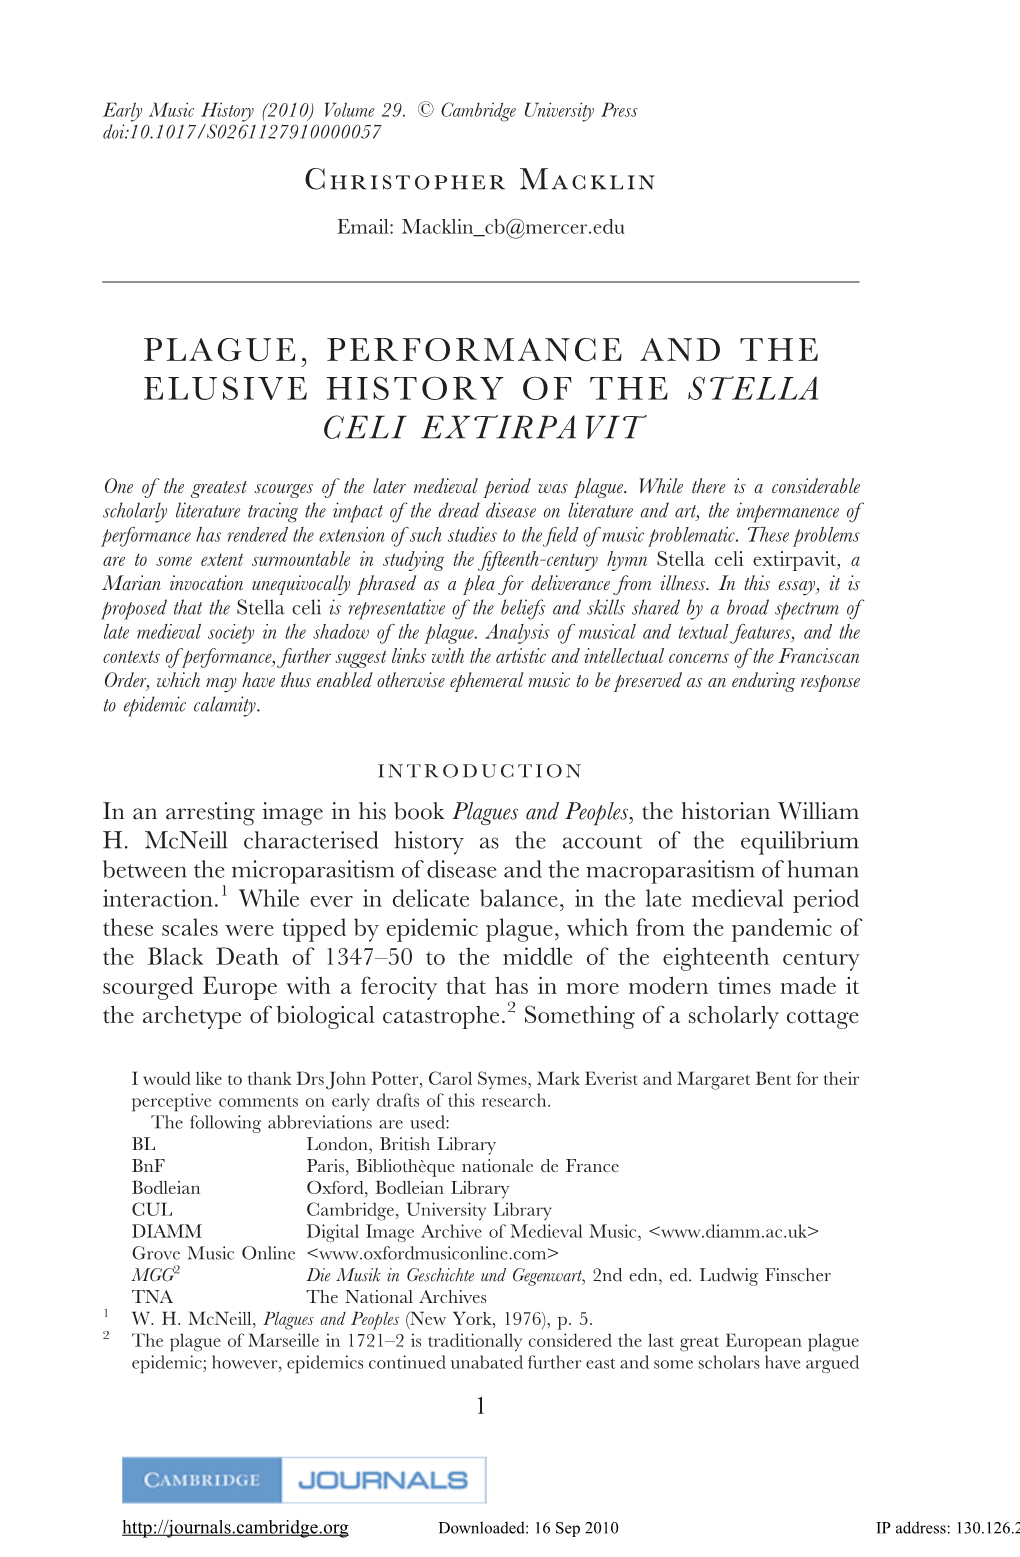 Plague, Performance and the Elusive History of the Stella Celi Extirpavit